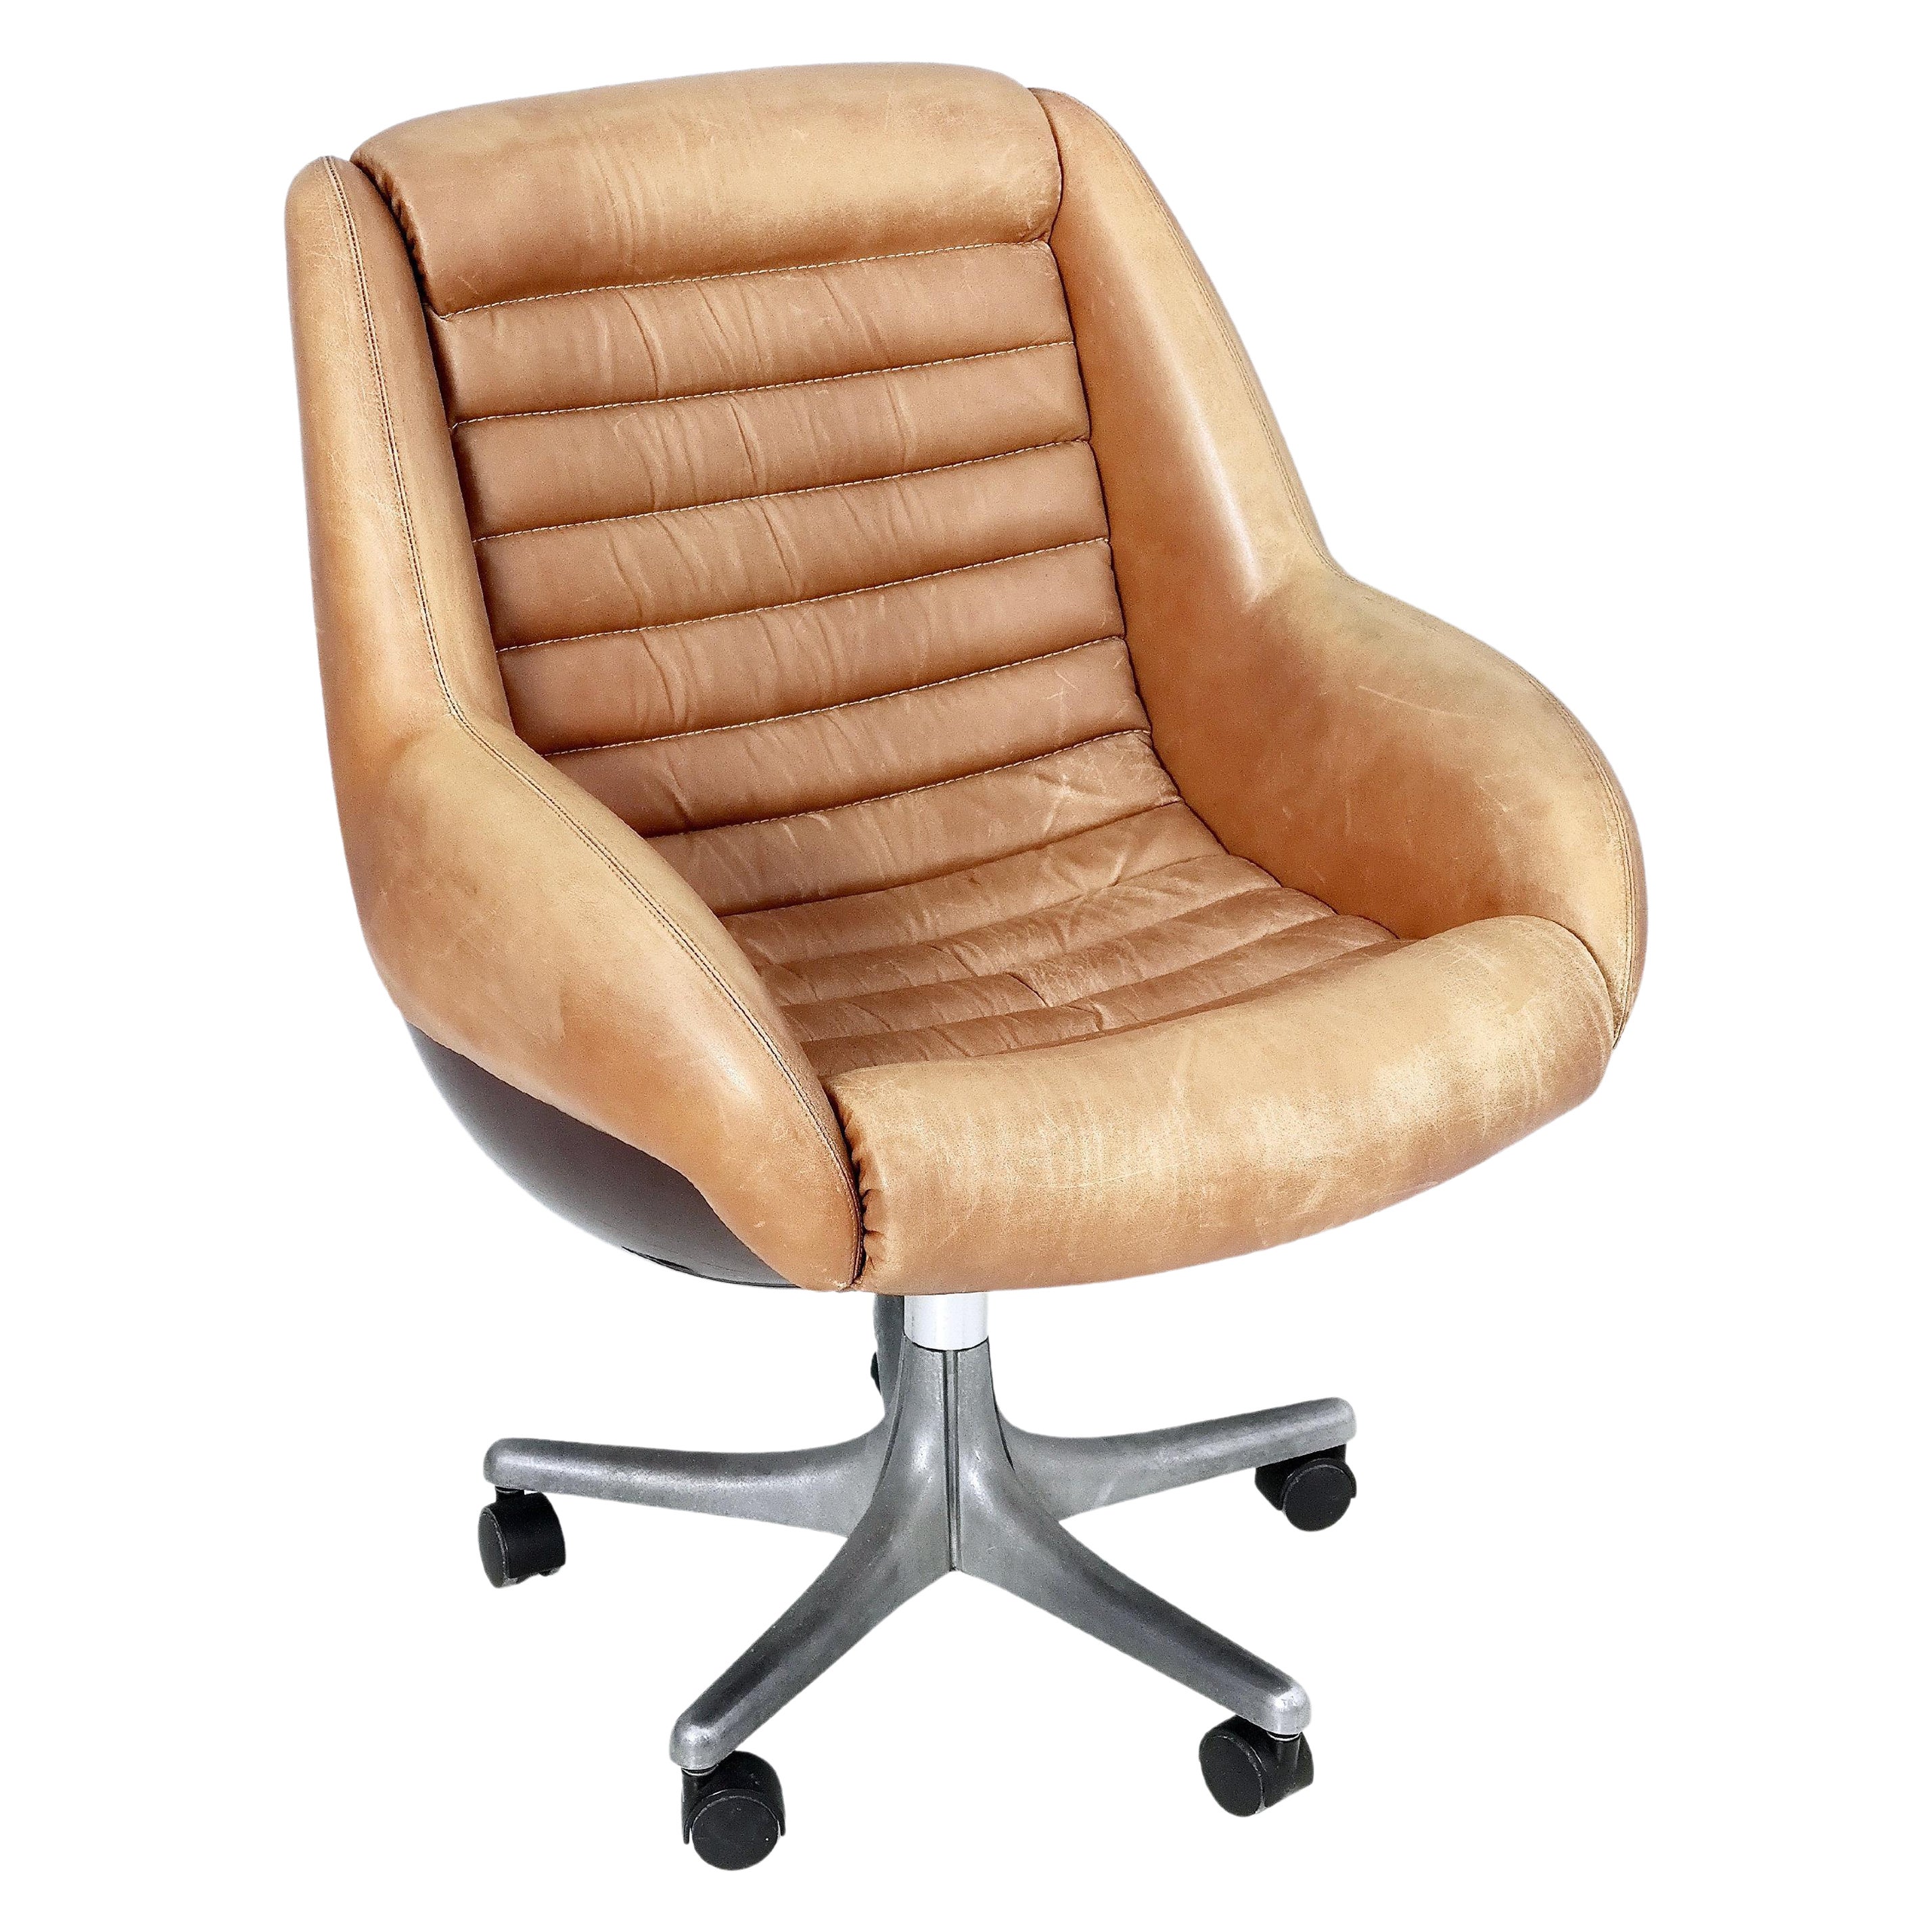 Rare Leather Swivel Chair "Epoca" by Marco Zanuso Produced by Arflex, Italy For Sale